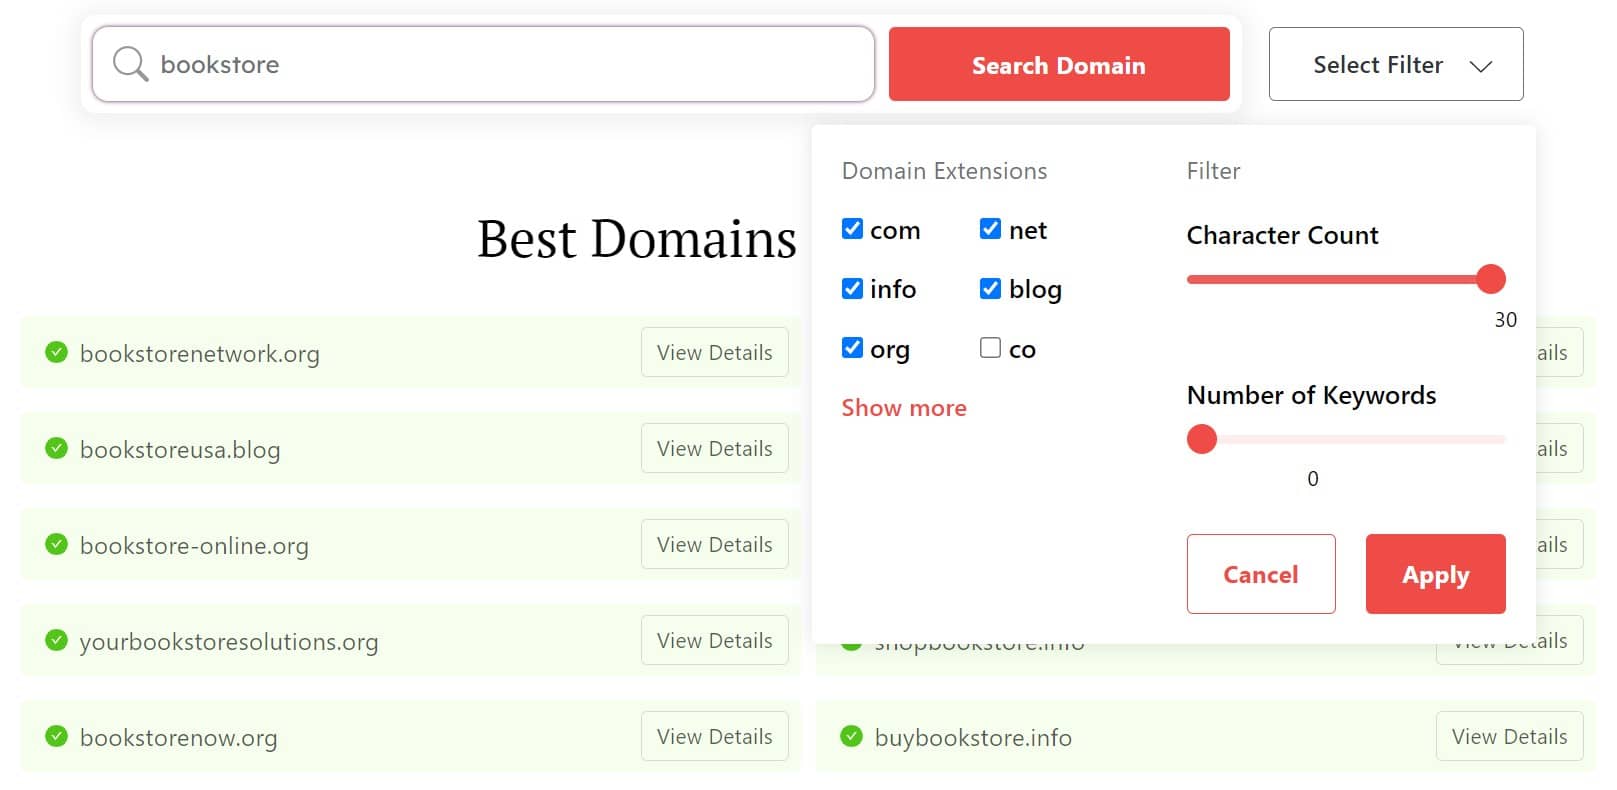 DomainWheel bookstore generator search filters for domain extensions, character count, and number of keywords